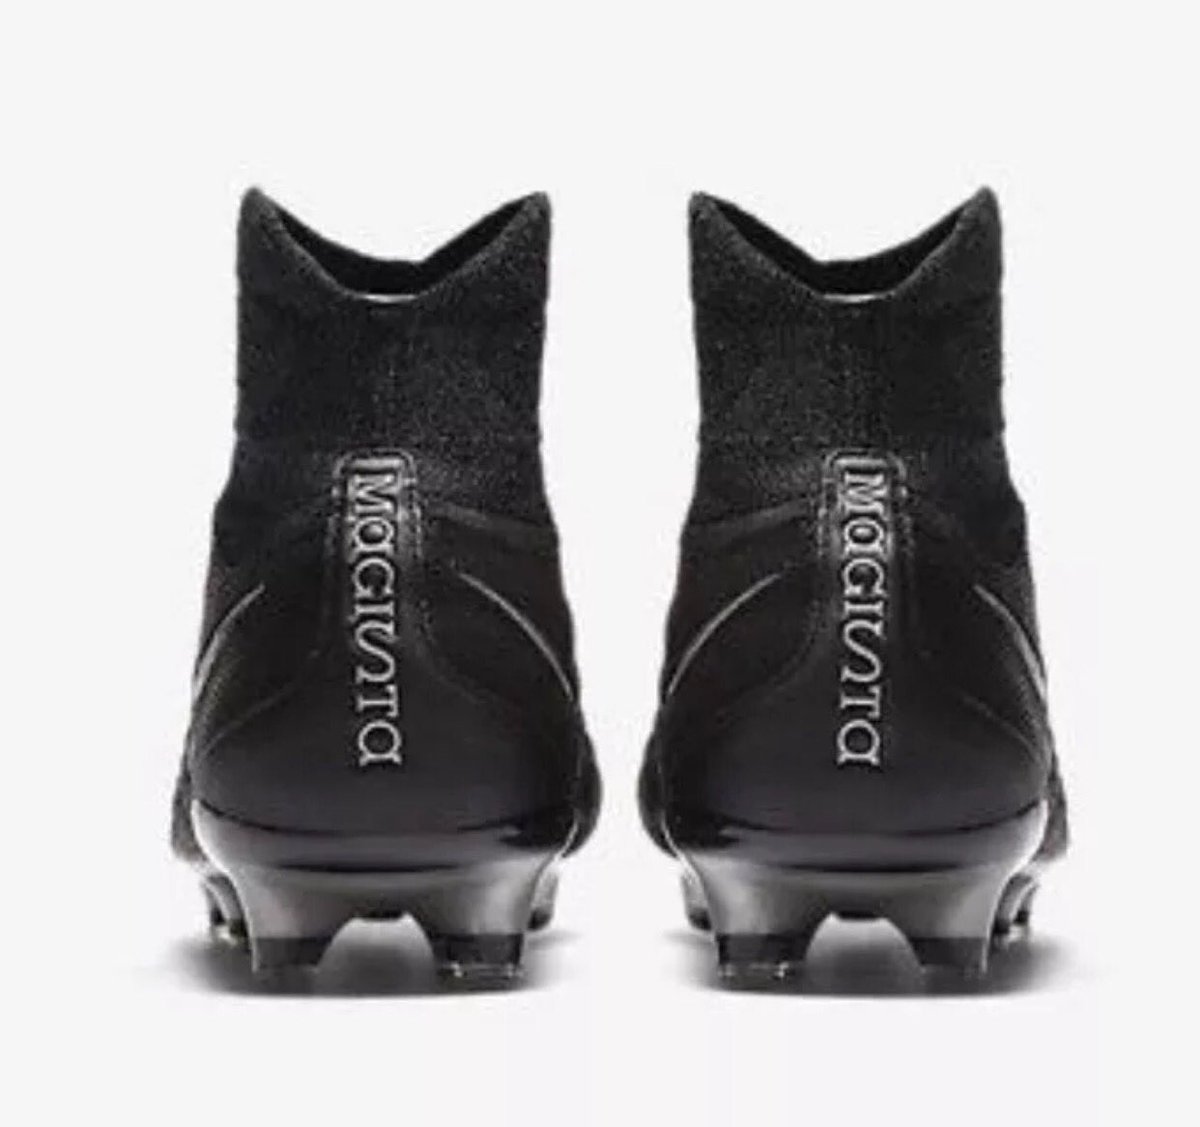 Nike MagistaX Proximo TF Turf Soccer Shoes (Wolf Pinterest